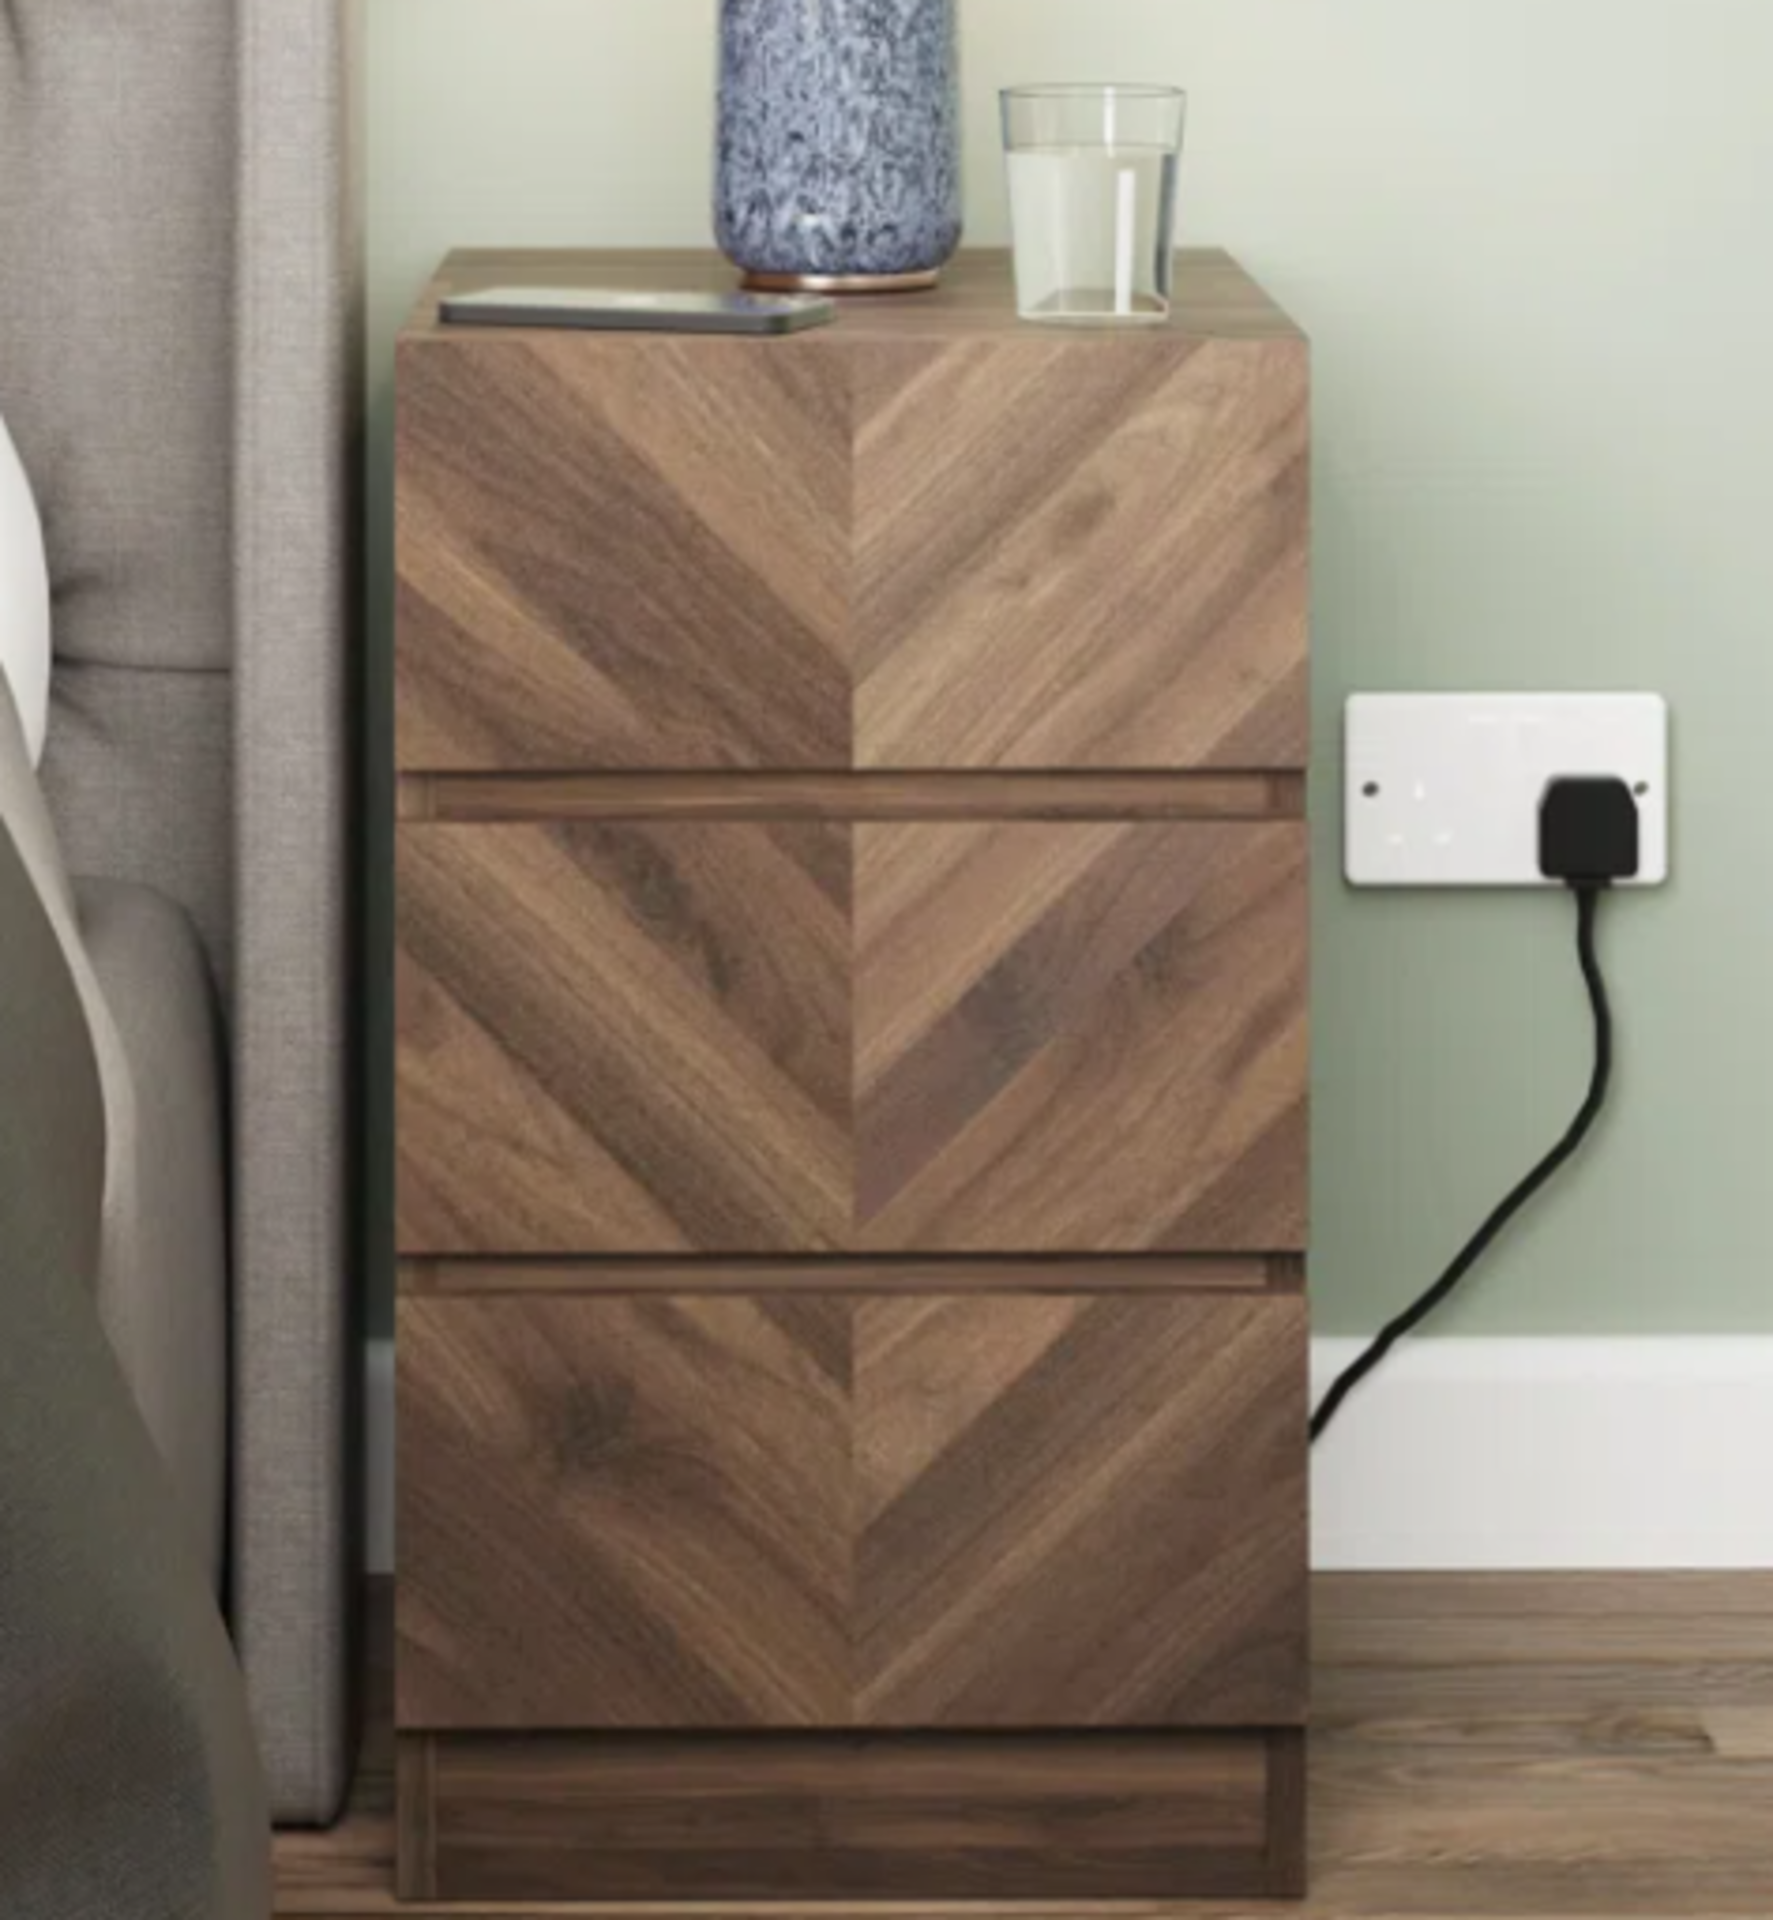 Kascha 3 Drawer Bedside Table. - Sr4. The drawer fronts of this elegant three-drawer bedside feature